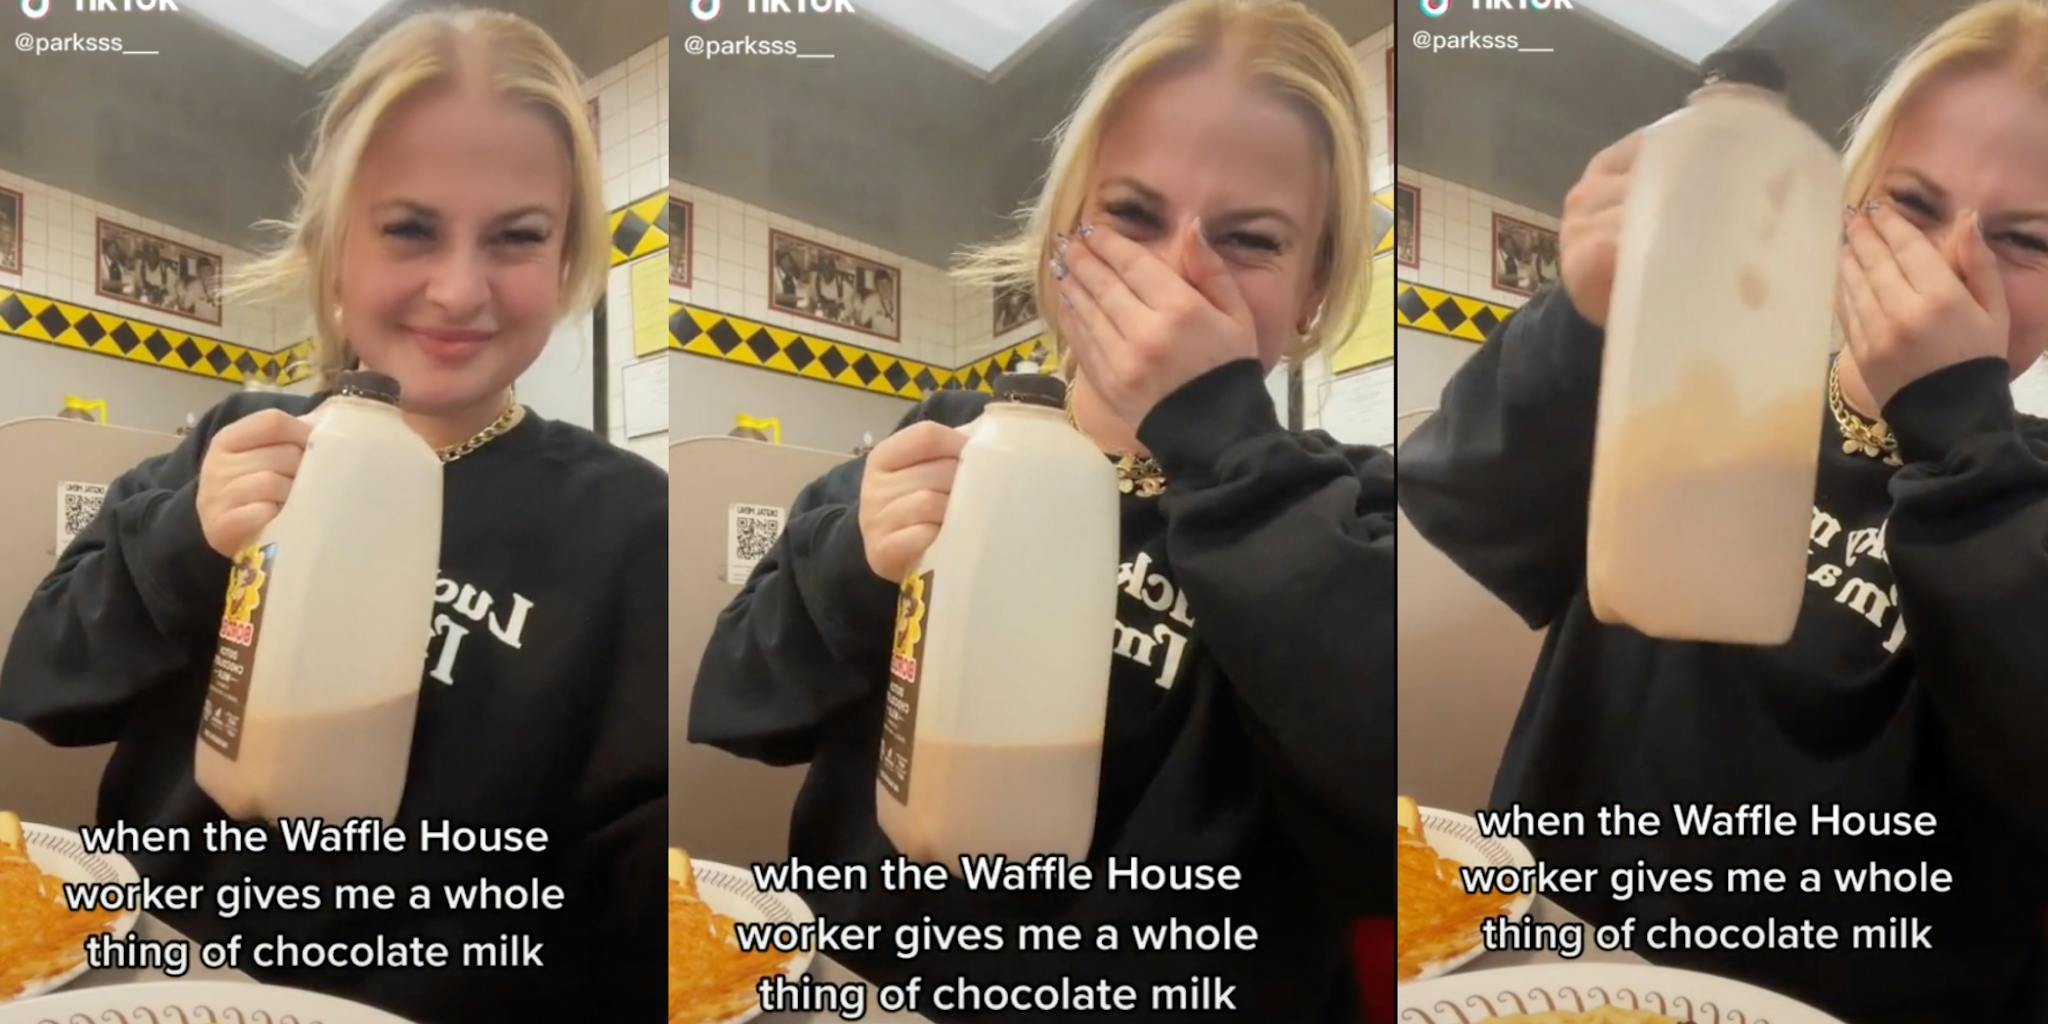 ‘That’s literally the best chocolate milk ever’: TikToker says Waffle House worker gave her whole jug of chocolate milk